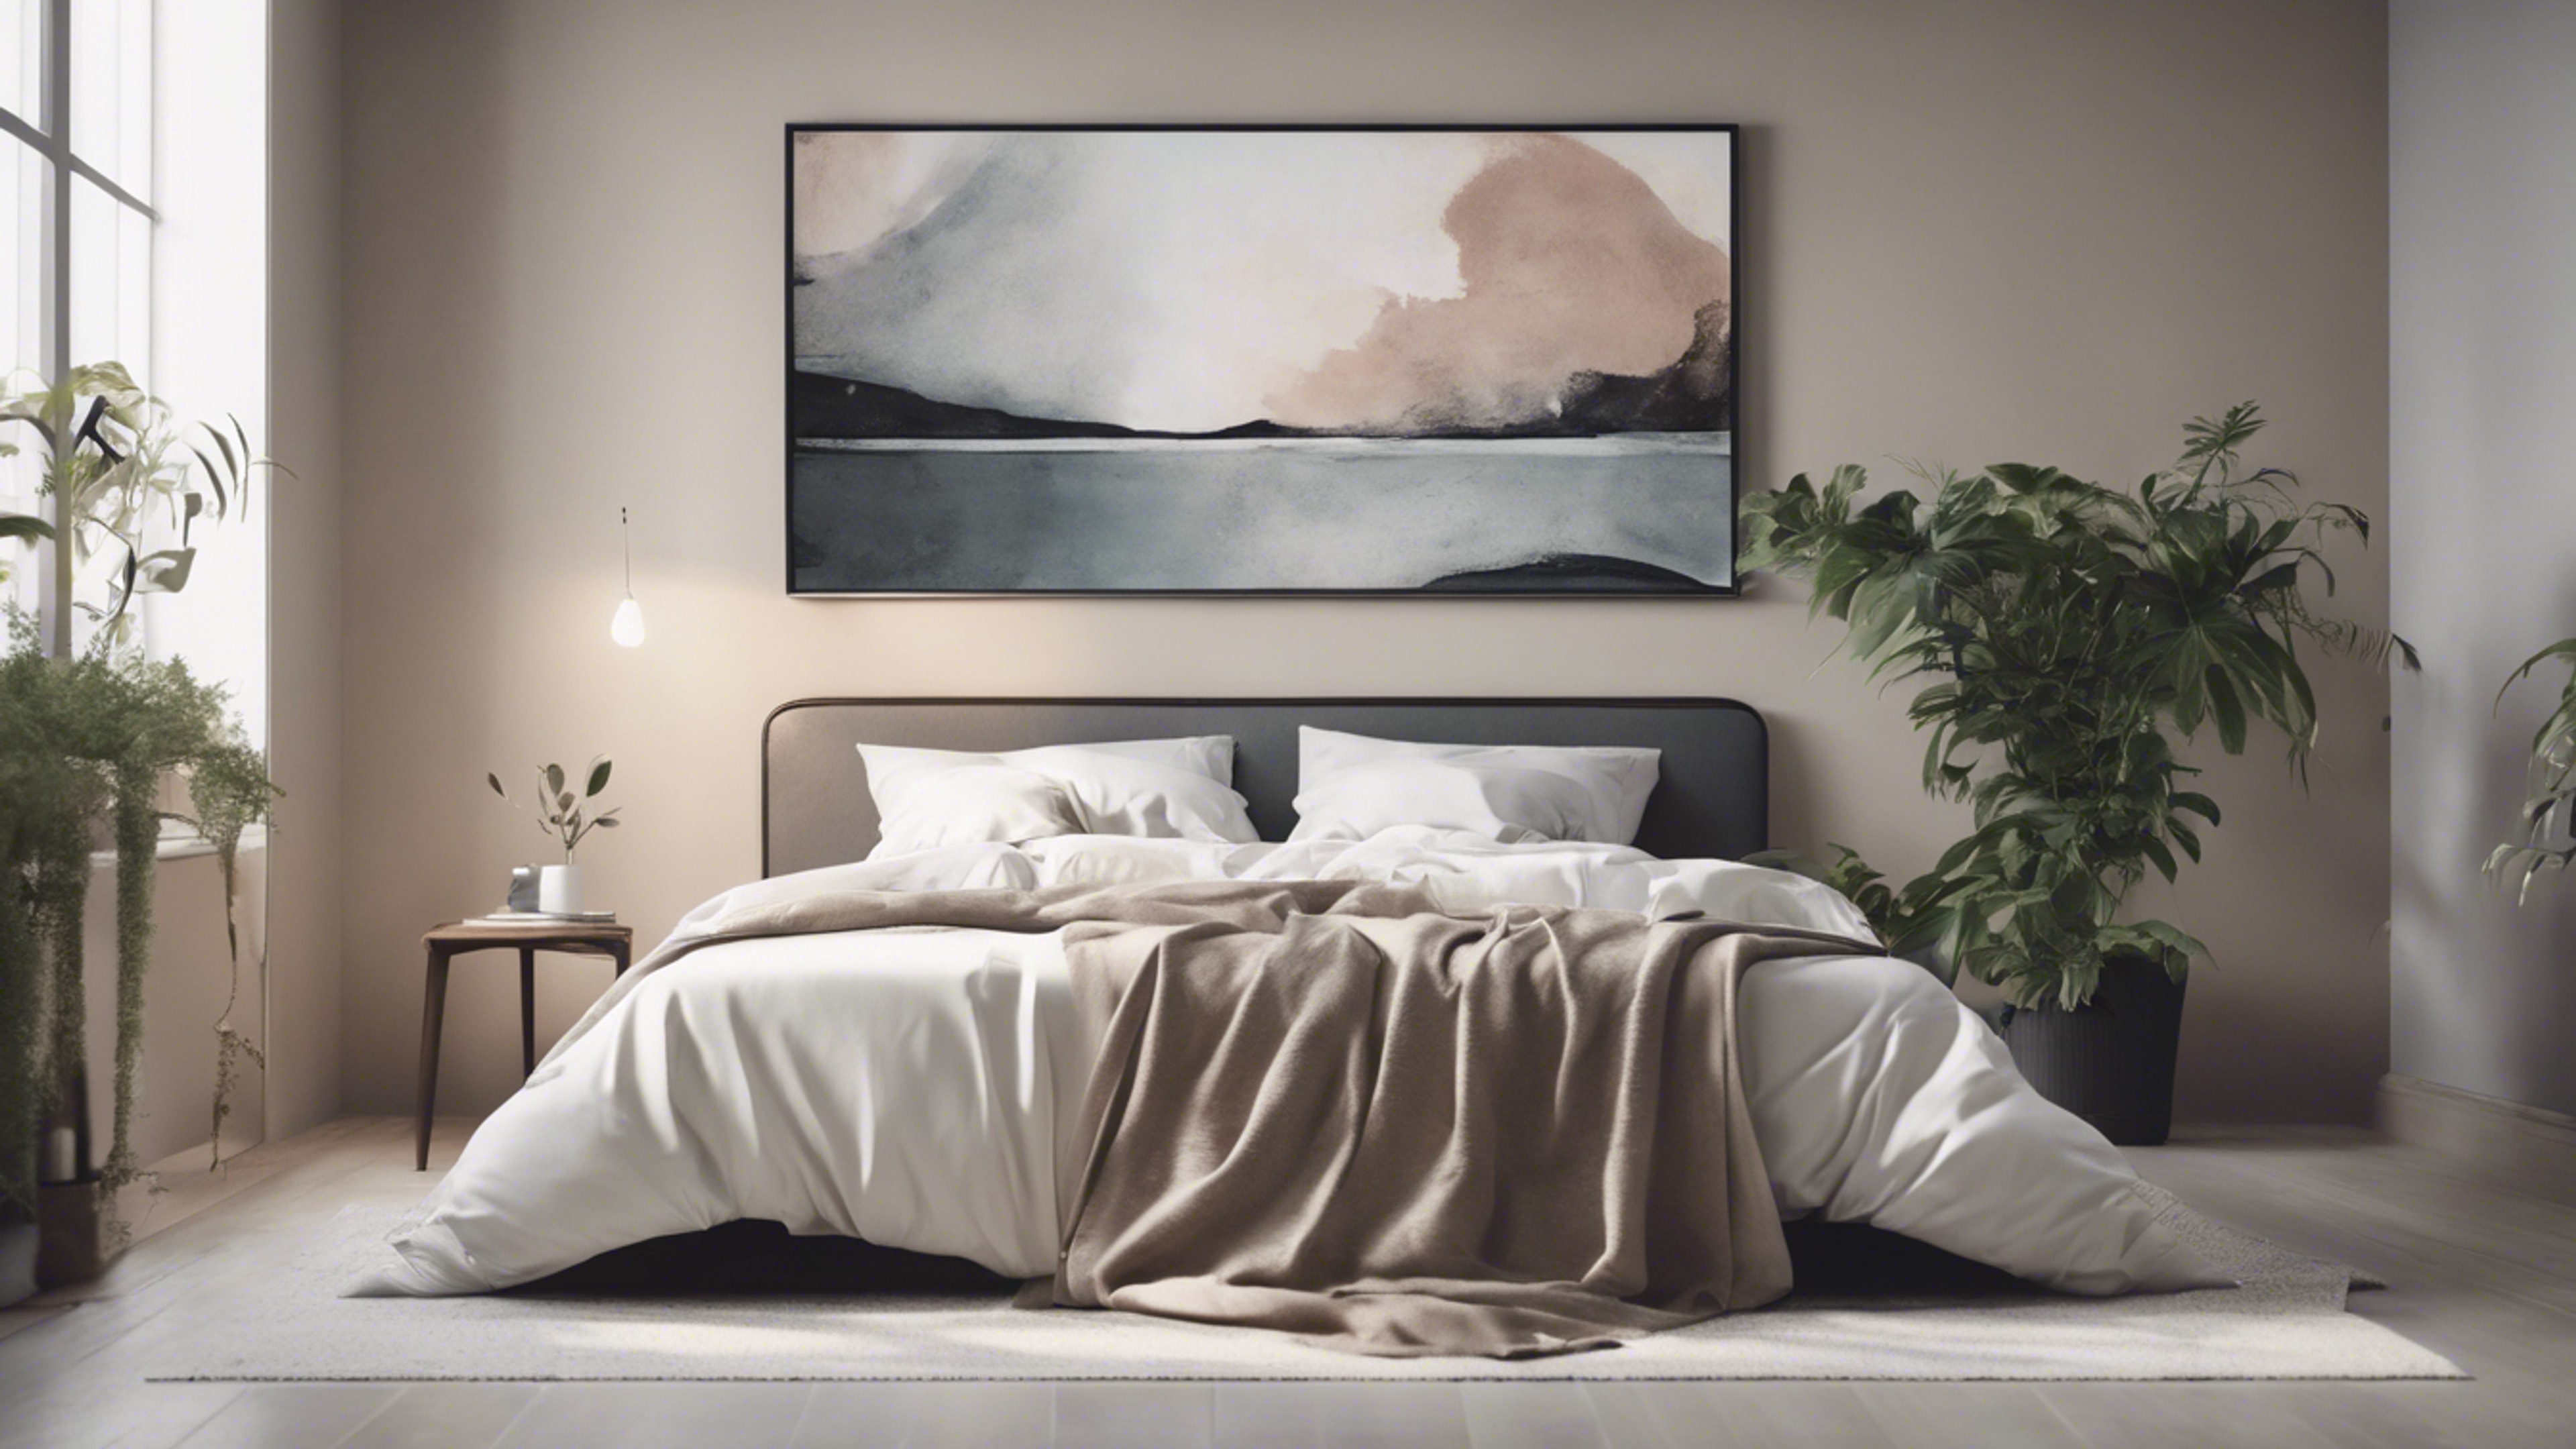 Minimalist bedroom in muted tones with a simple queen-sized bed, a potted plant, and an abstract painting. کاغذ دیواری[015f6f42387b4ed28c5e]